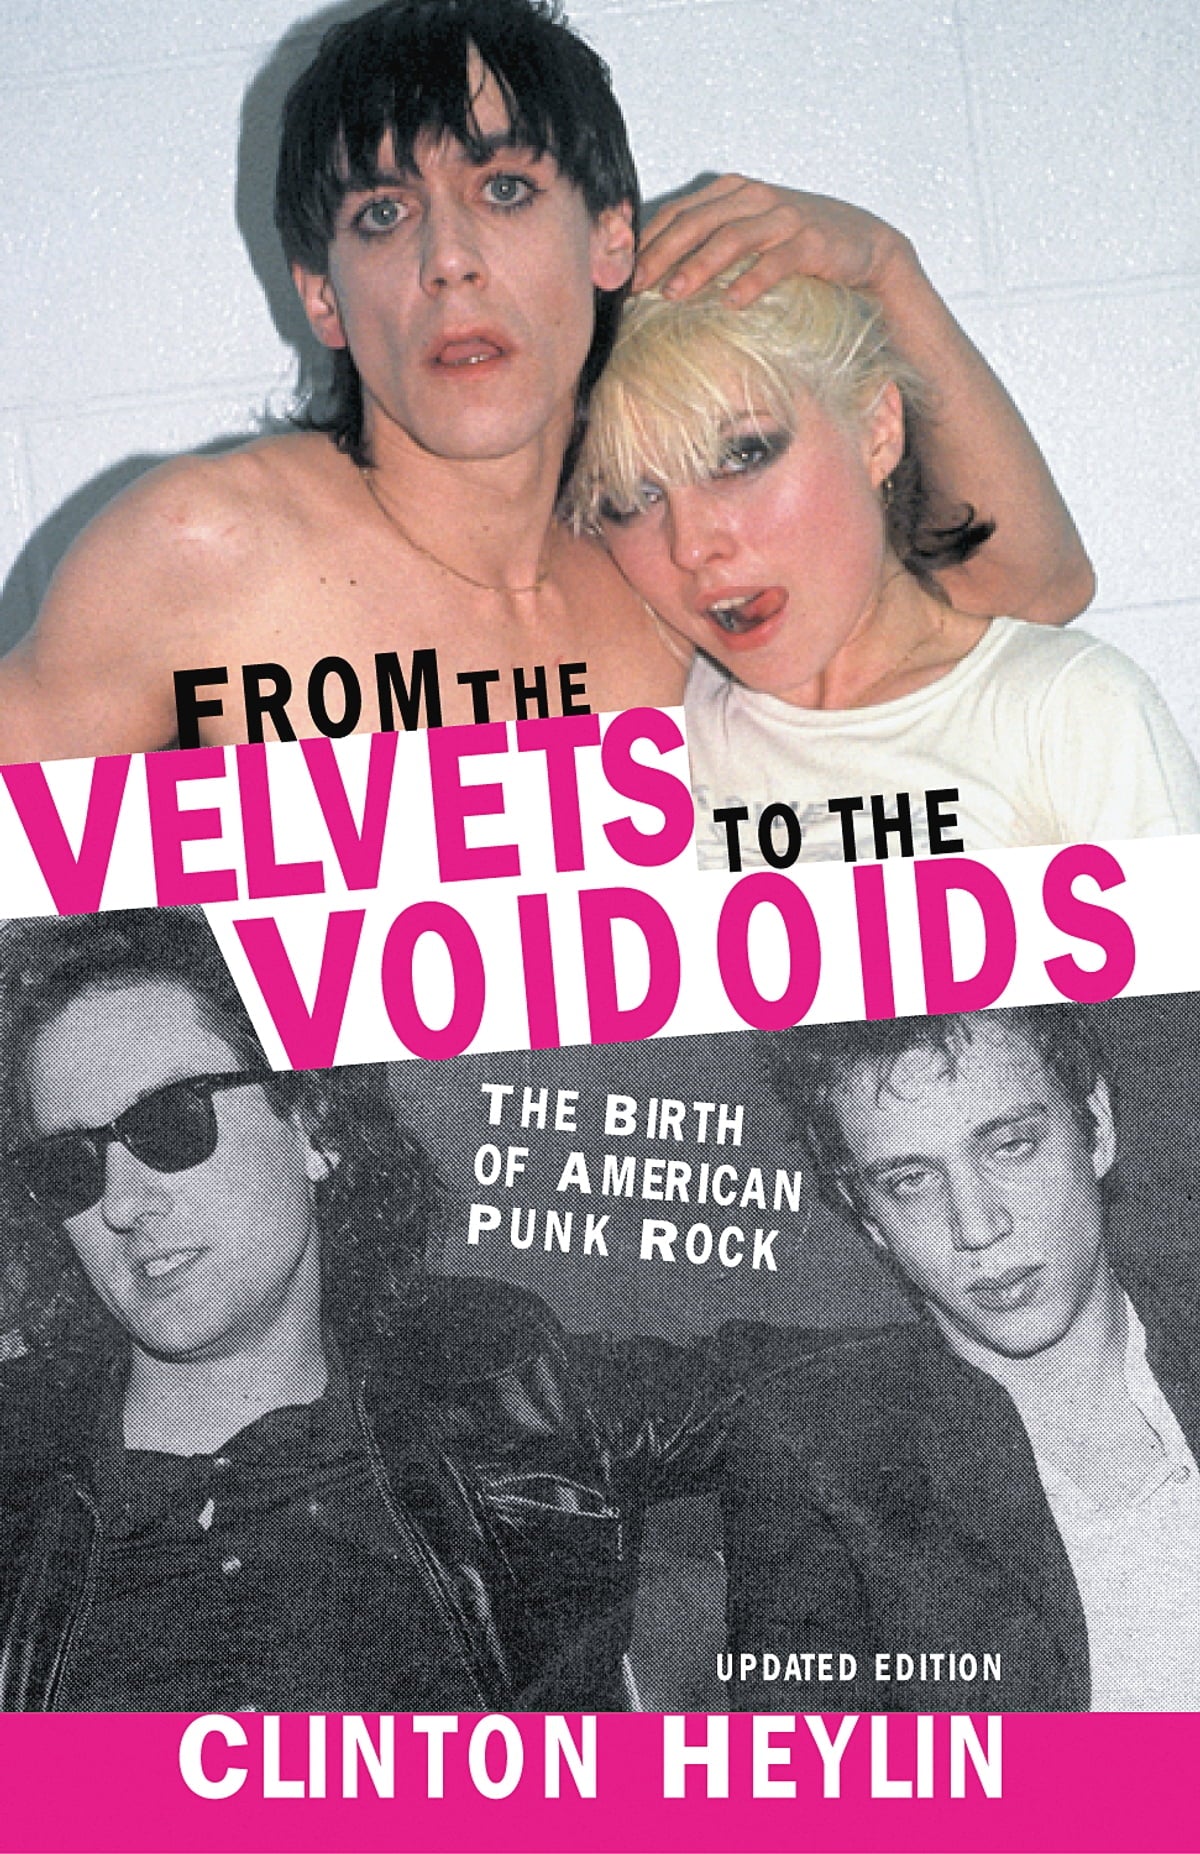 FROM THE VELVETS TO THE VOIDOIDS: THE BIRTH OF AMERICAN PUNK ROCK - BOOK